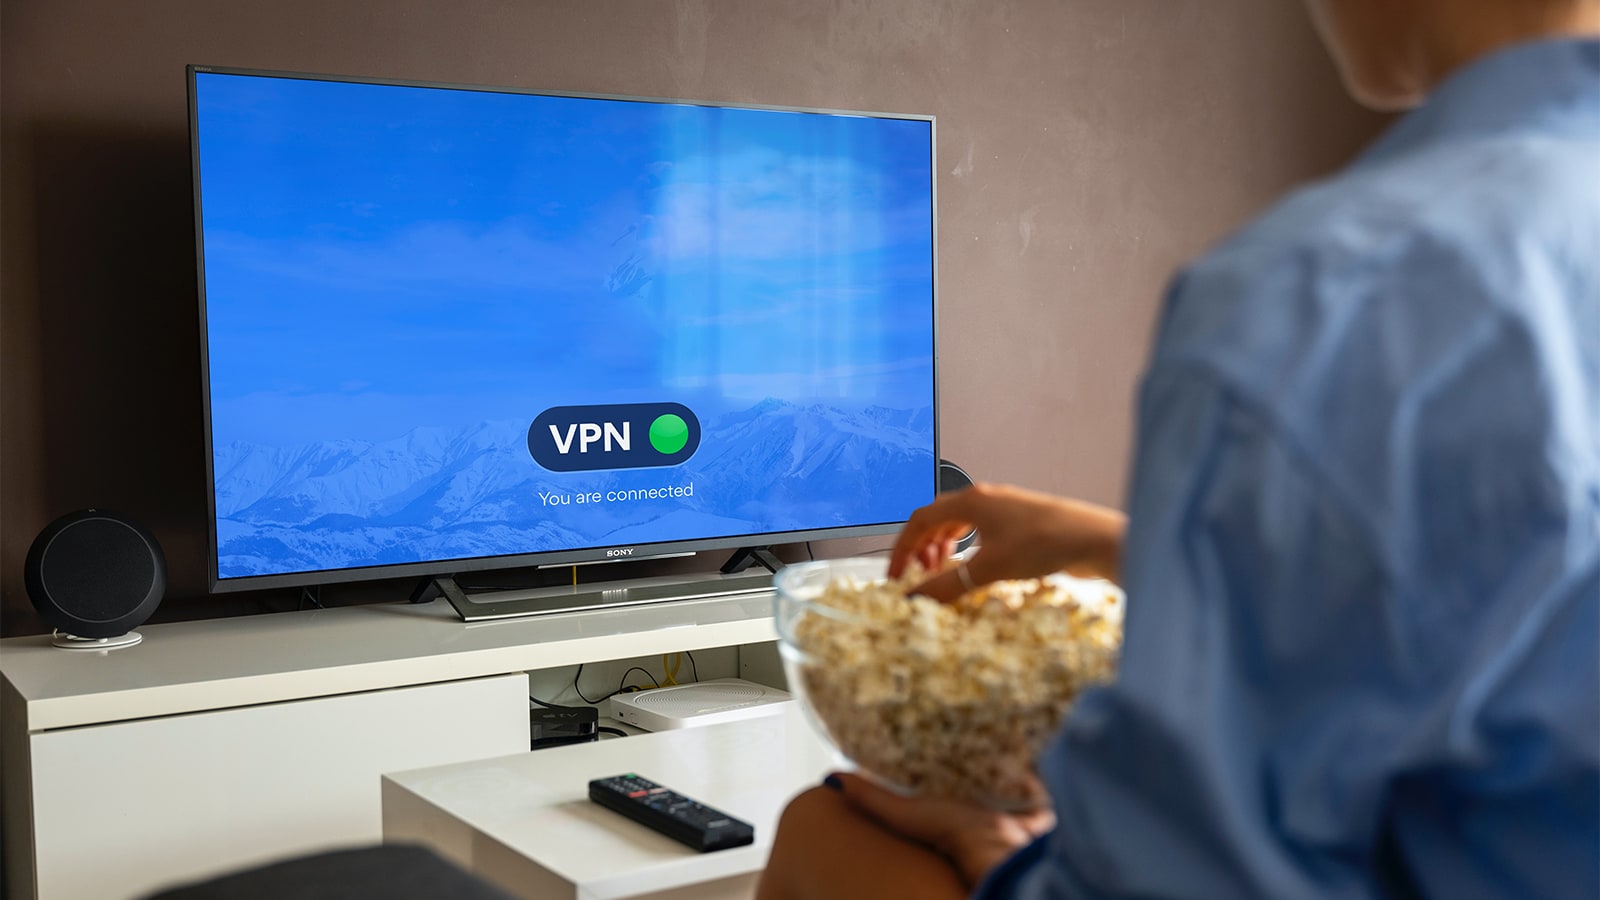 How To Disable VPN On Smart TV